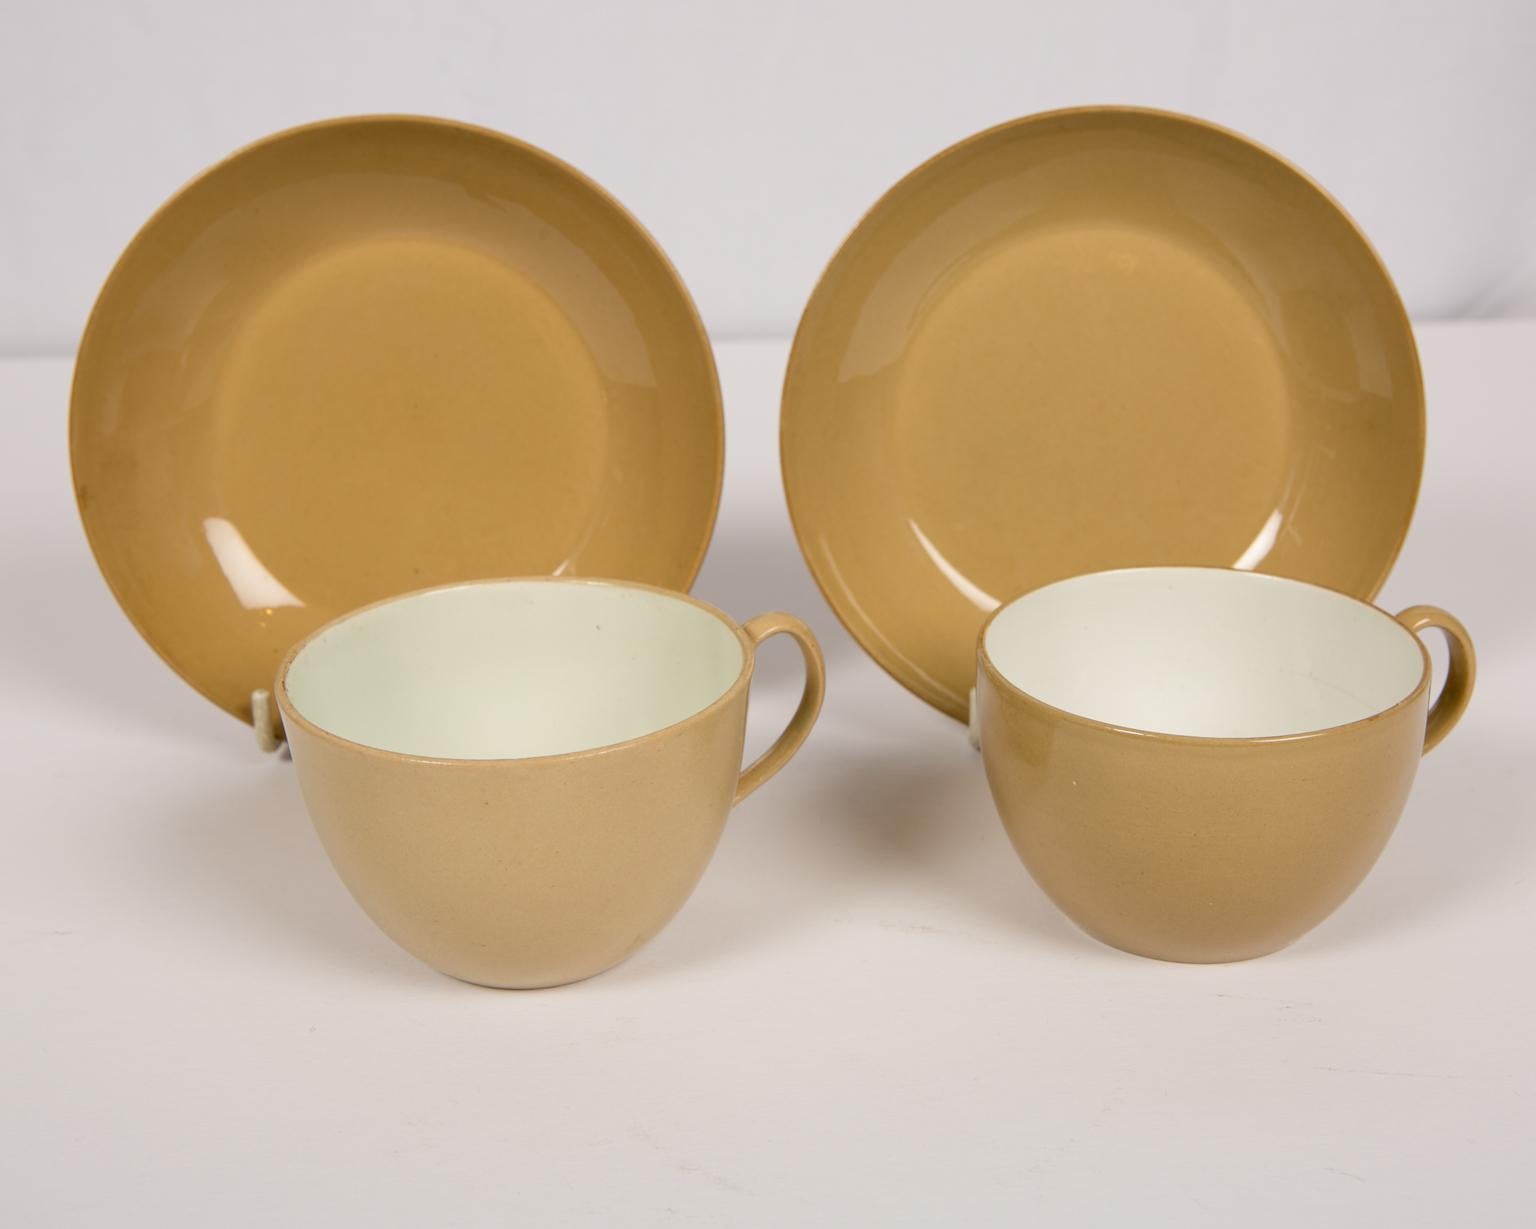 We are pleased to offer this pair of Wedgwood drabware cups and saucers dated circa 1810. Drabware is made with dark clay as compared with other colored earthenware’s, which are made with a white body and then tinted with glazes. Drabware colors